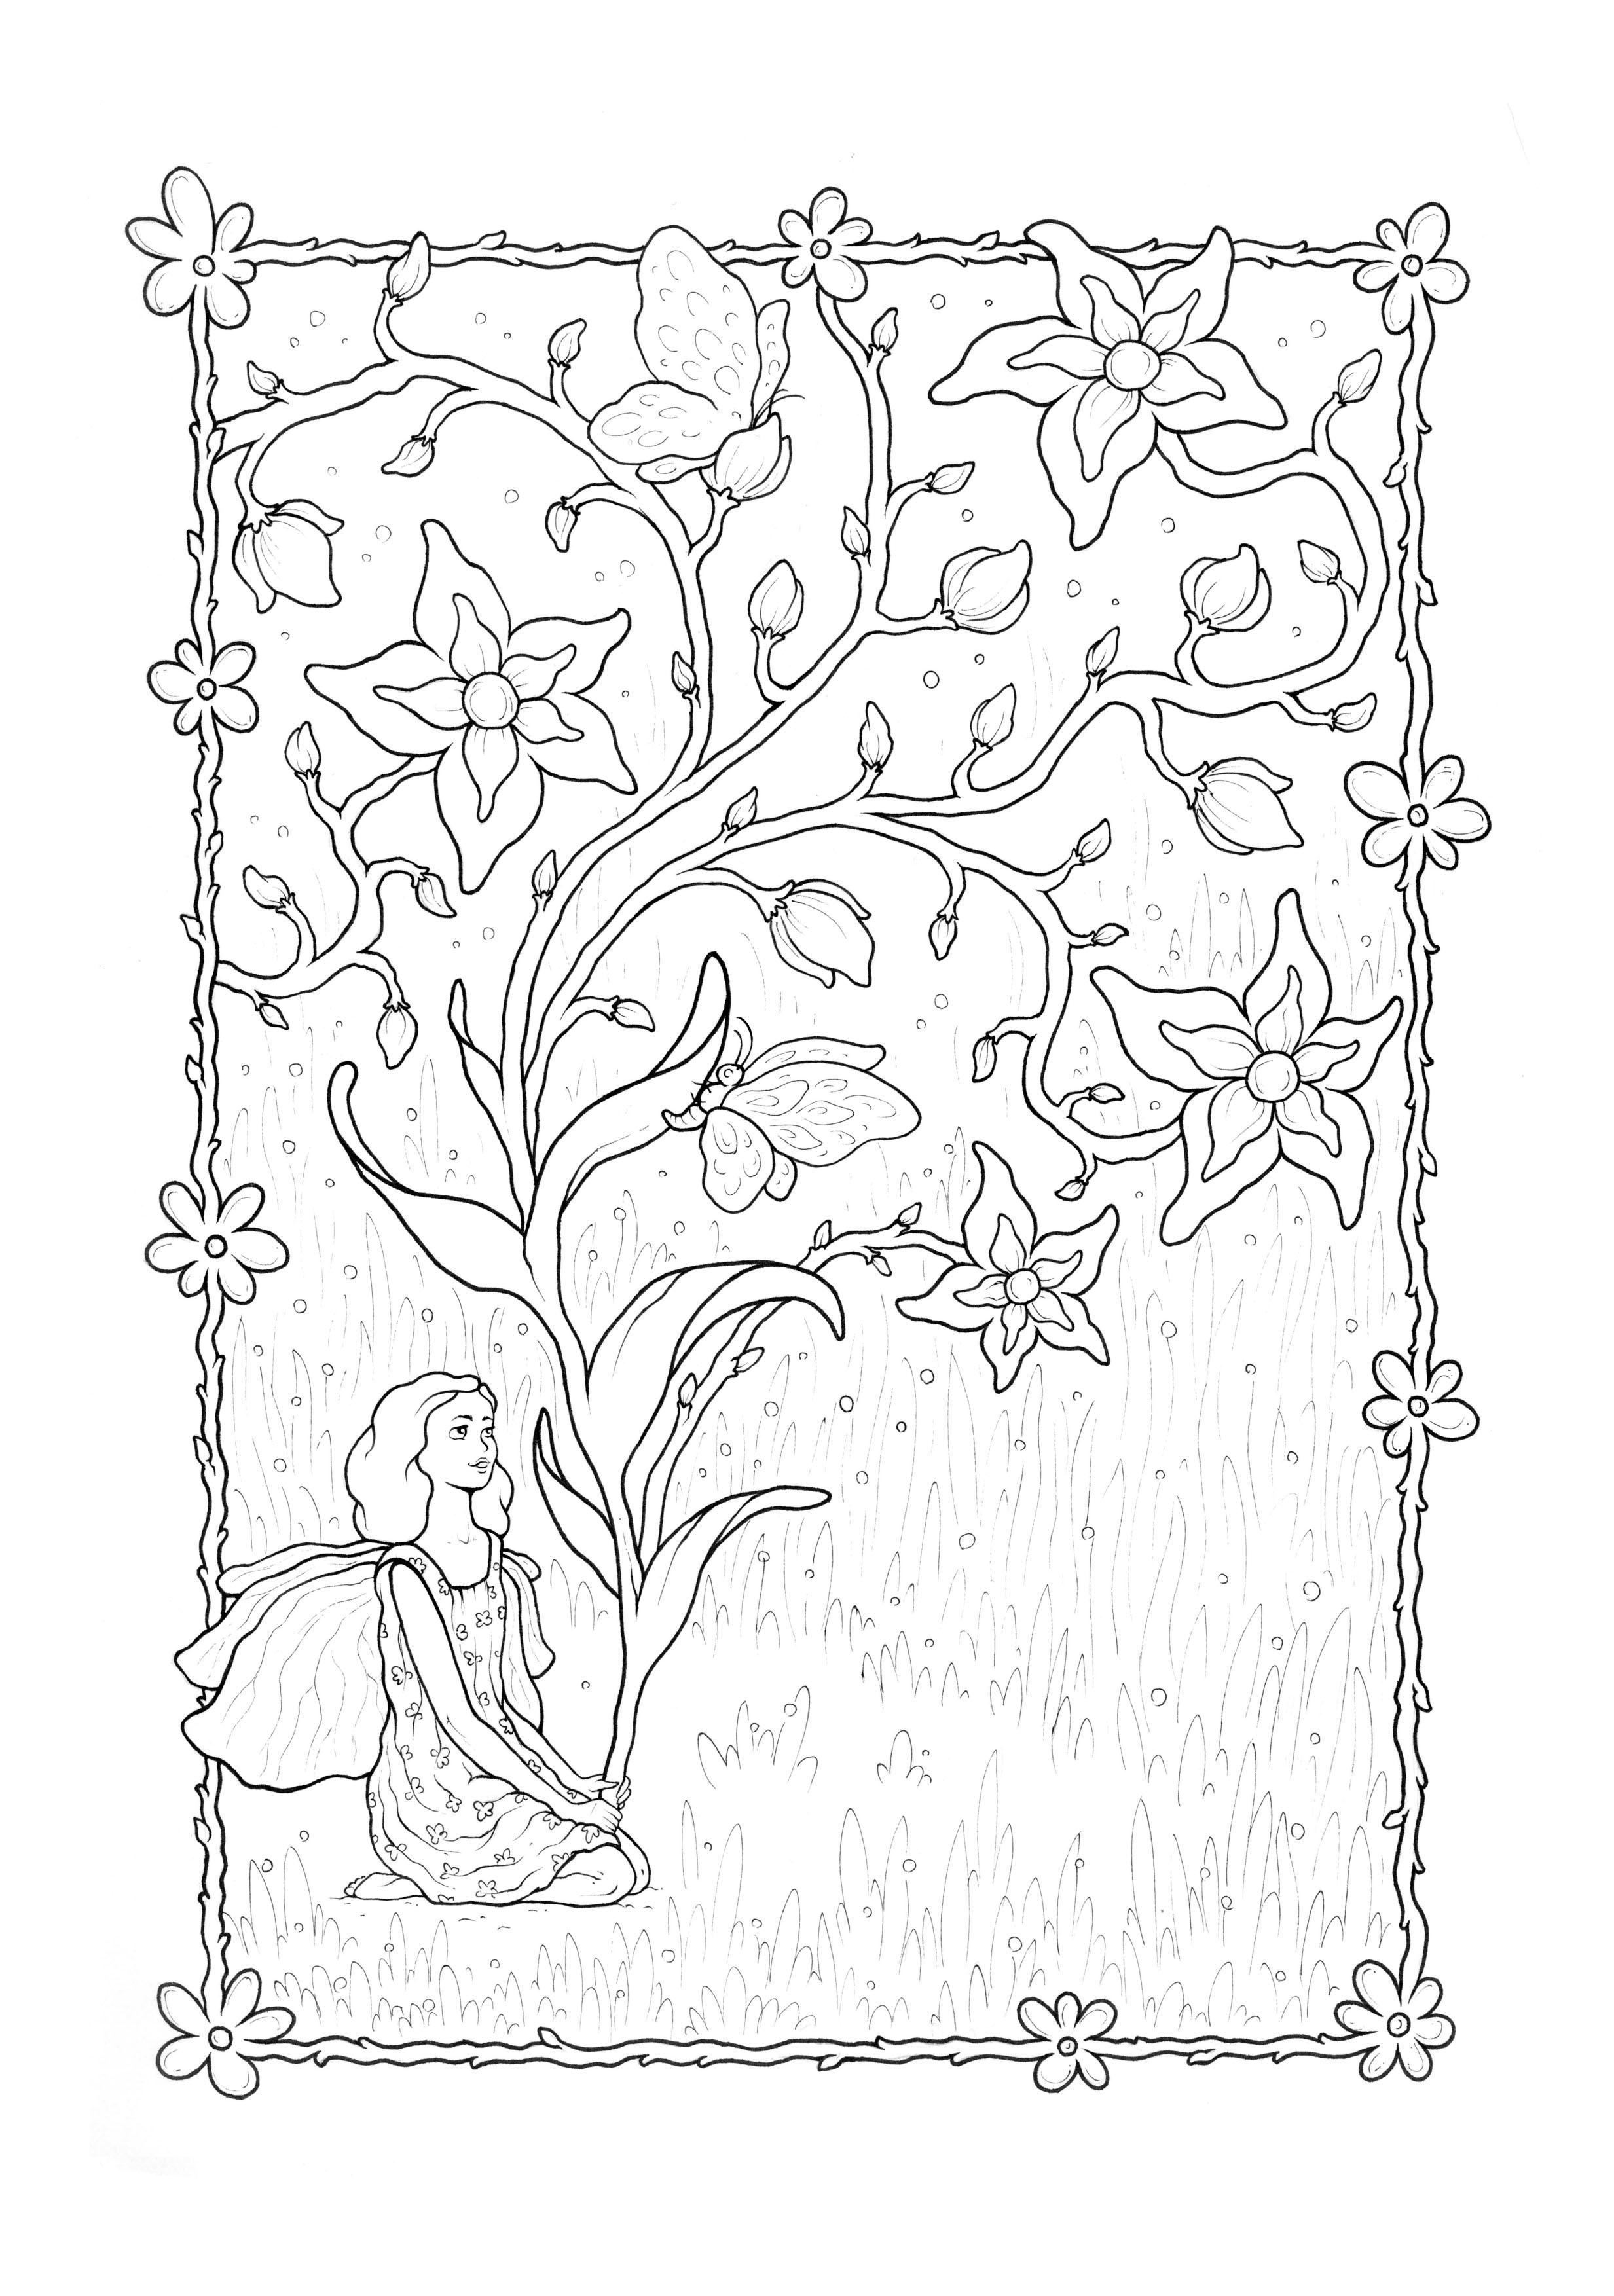 Simple Fairy coloring page to print and color for free